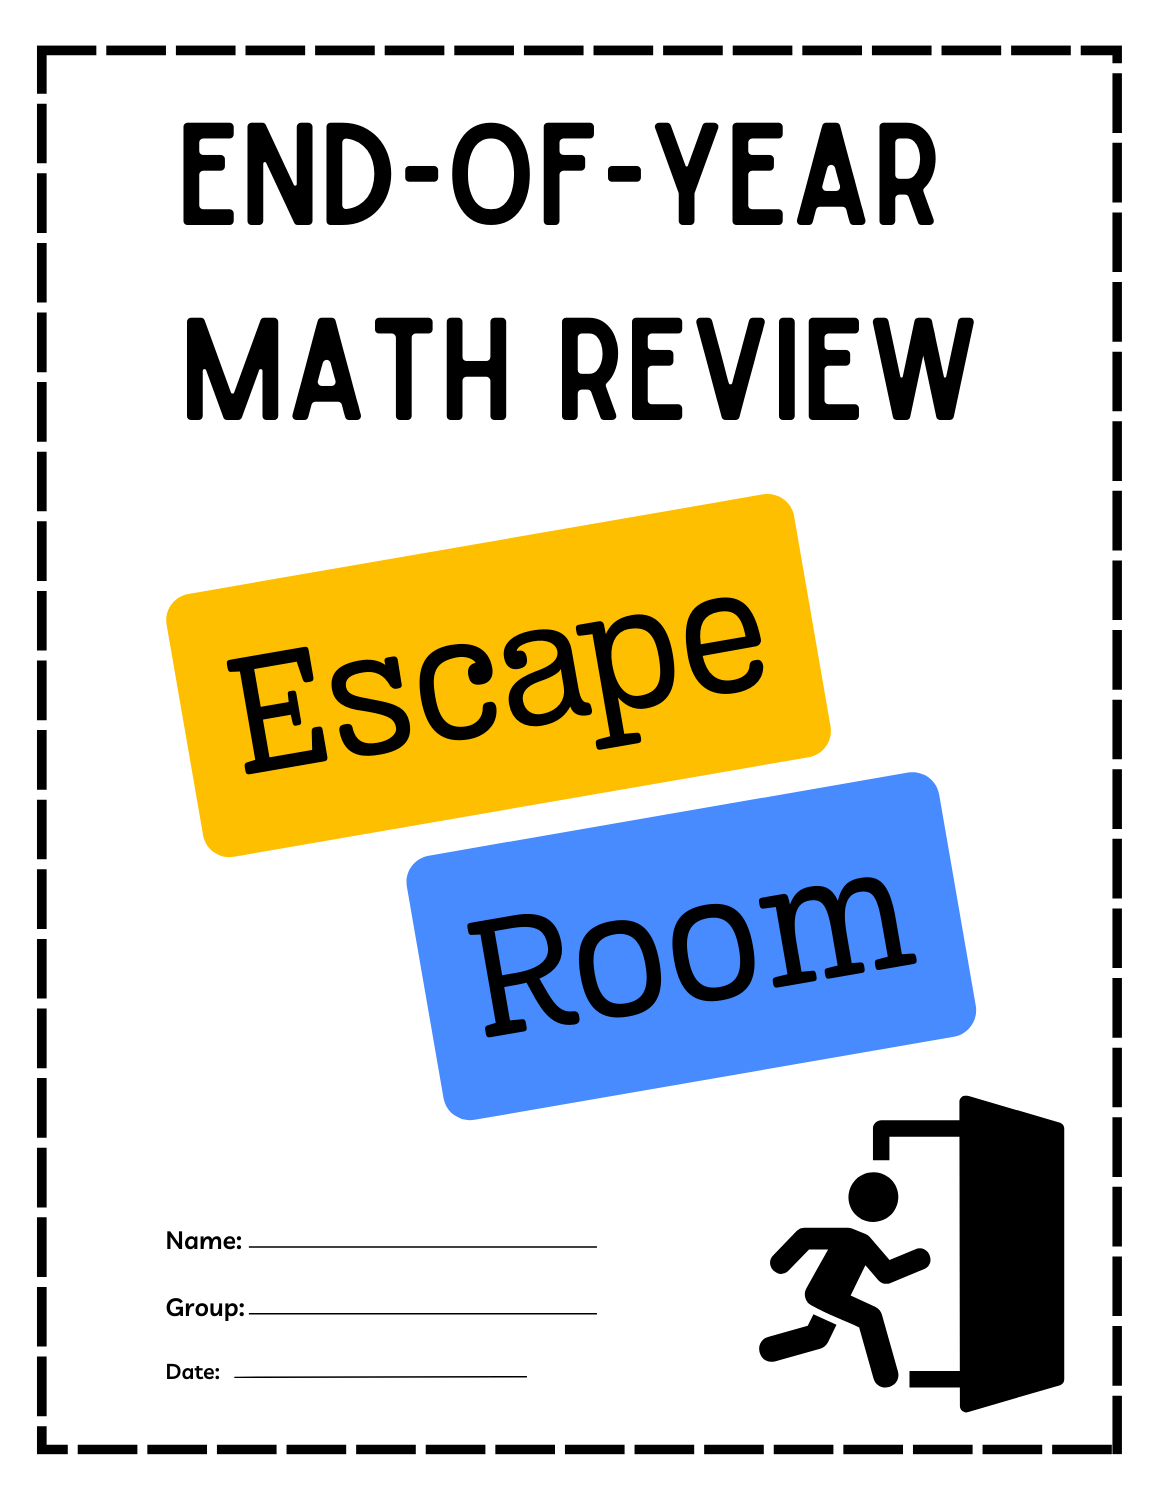 End of the year math review - escape room